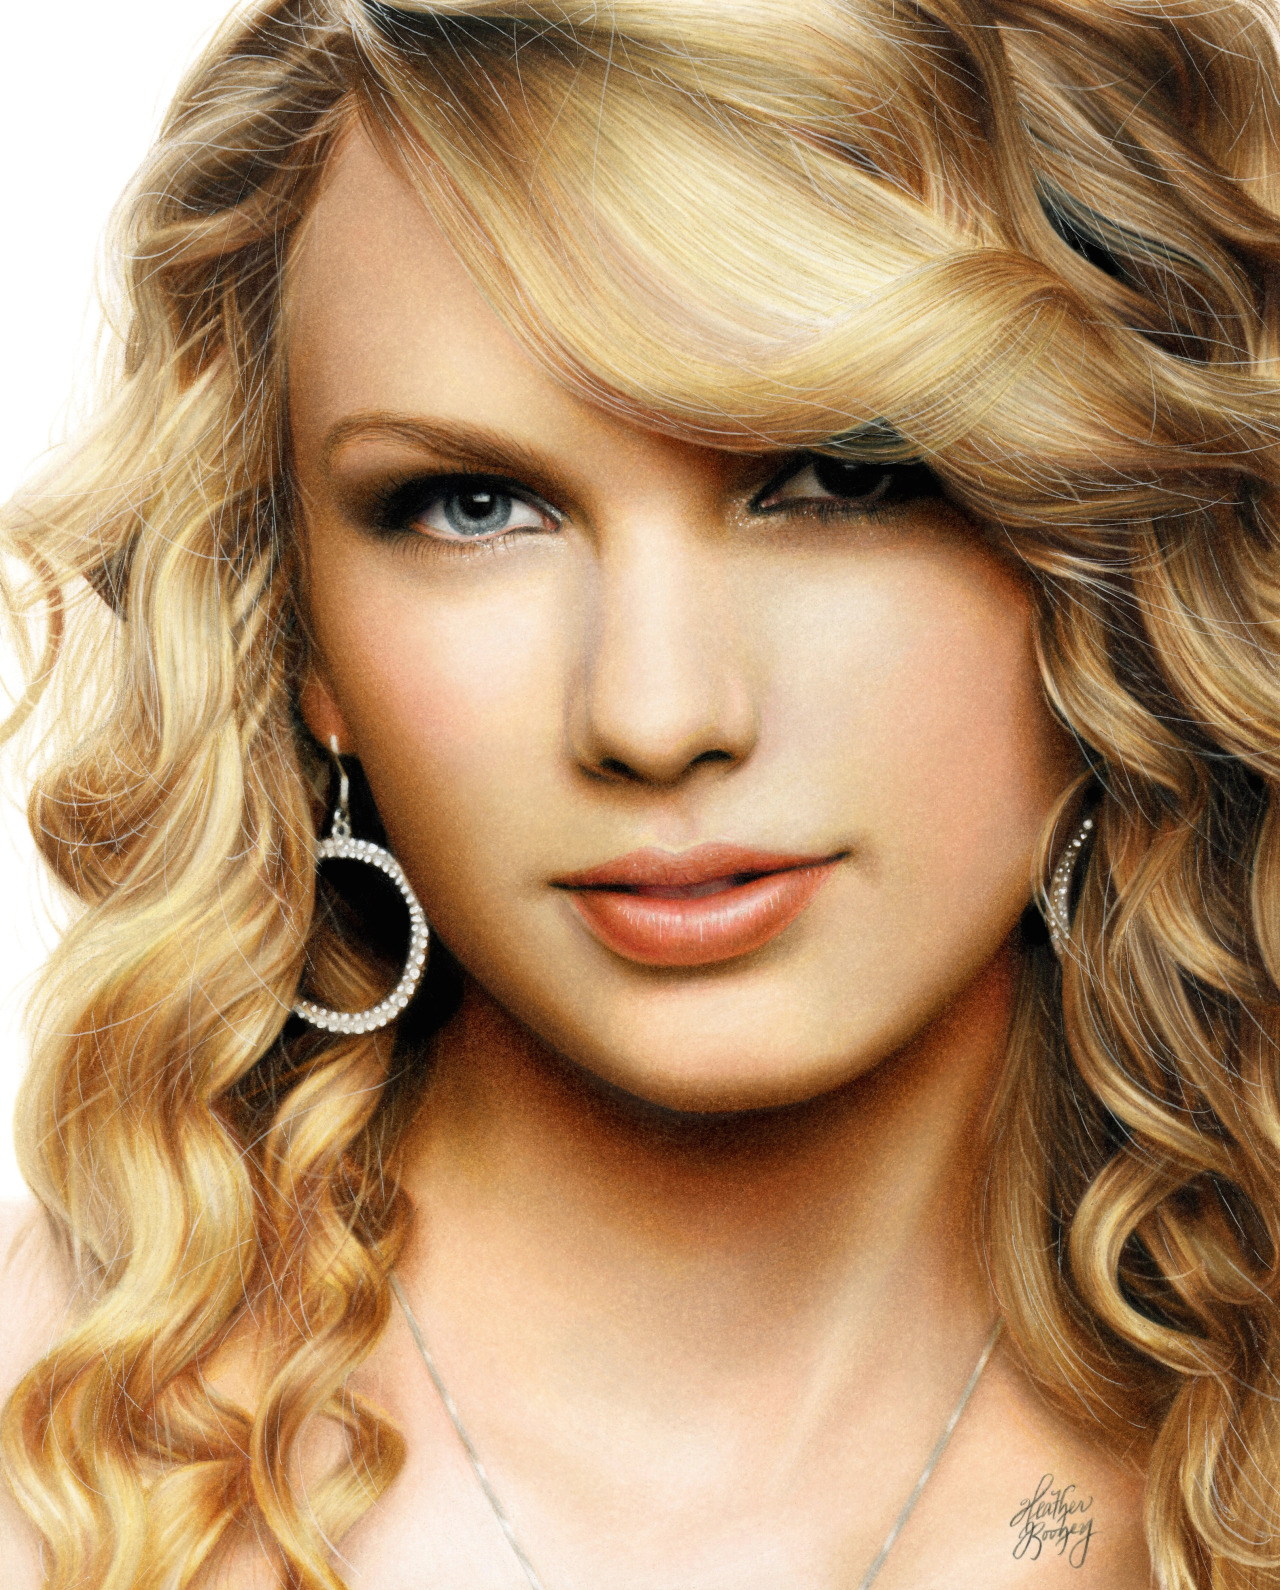 Heather Rooney Art — Colored pencil drawing of Taylor Swift by